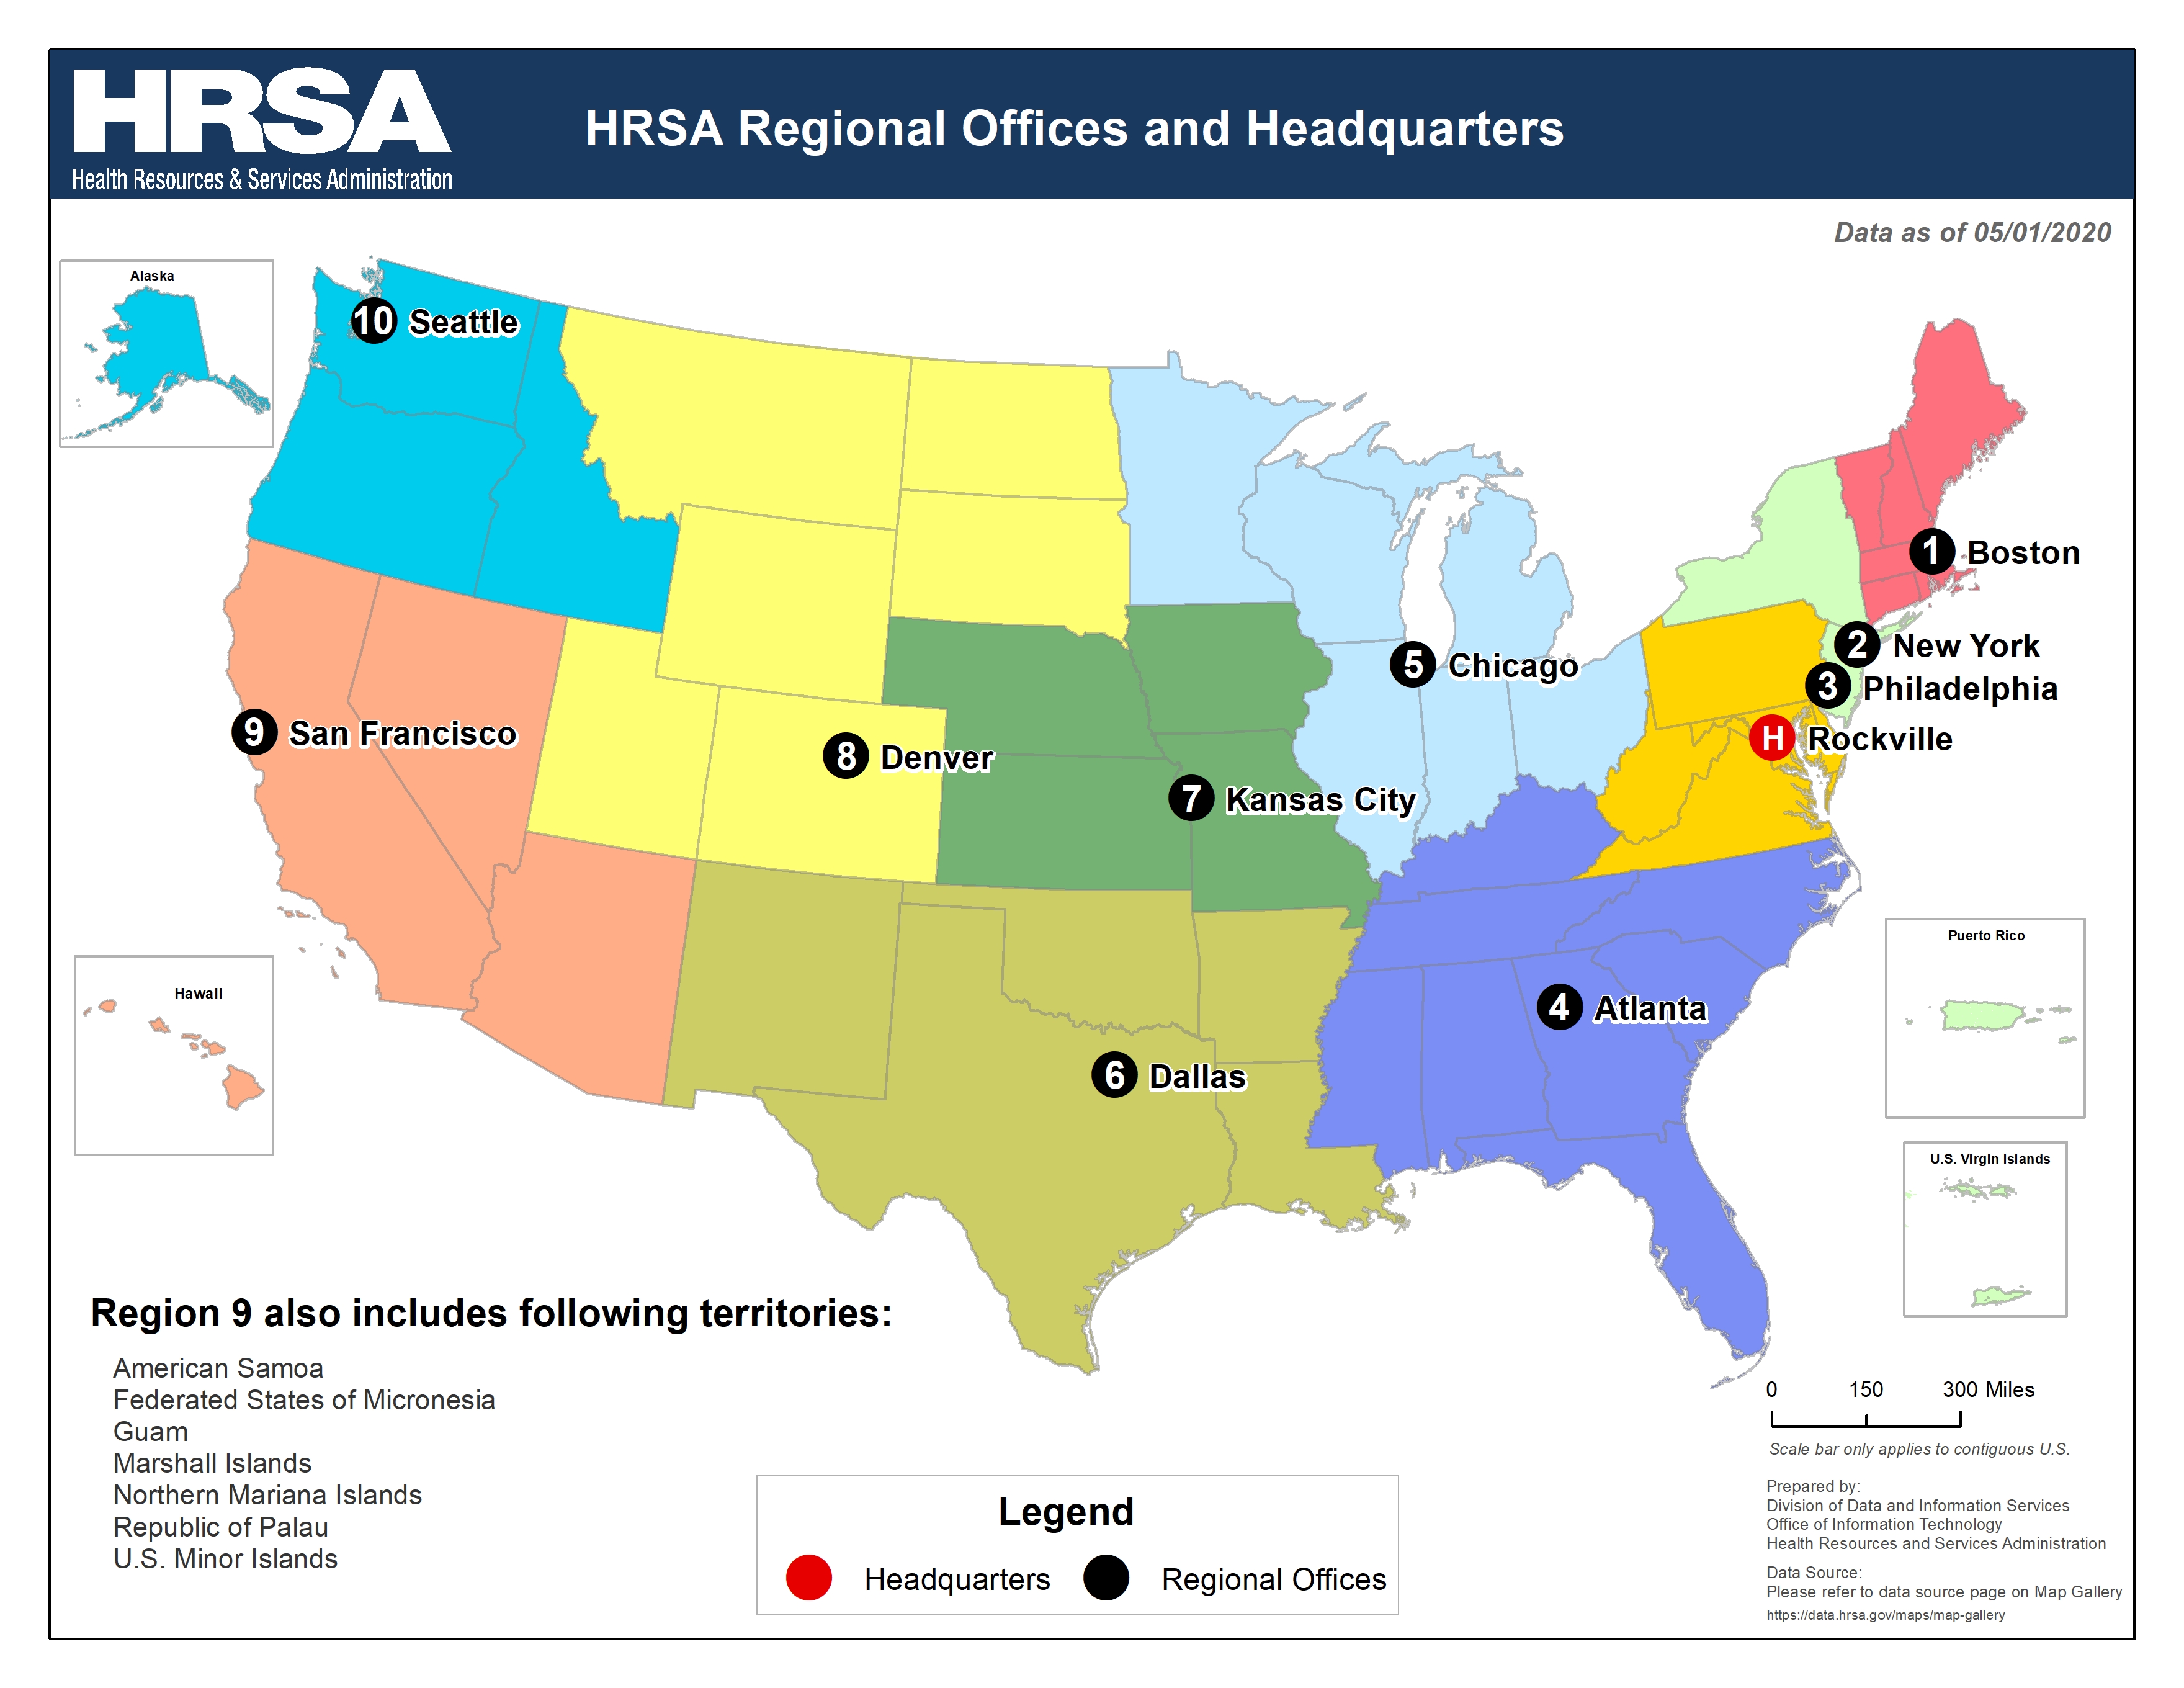 Preview Map of HRSA Regional Offices